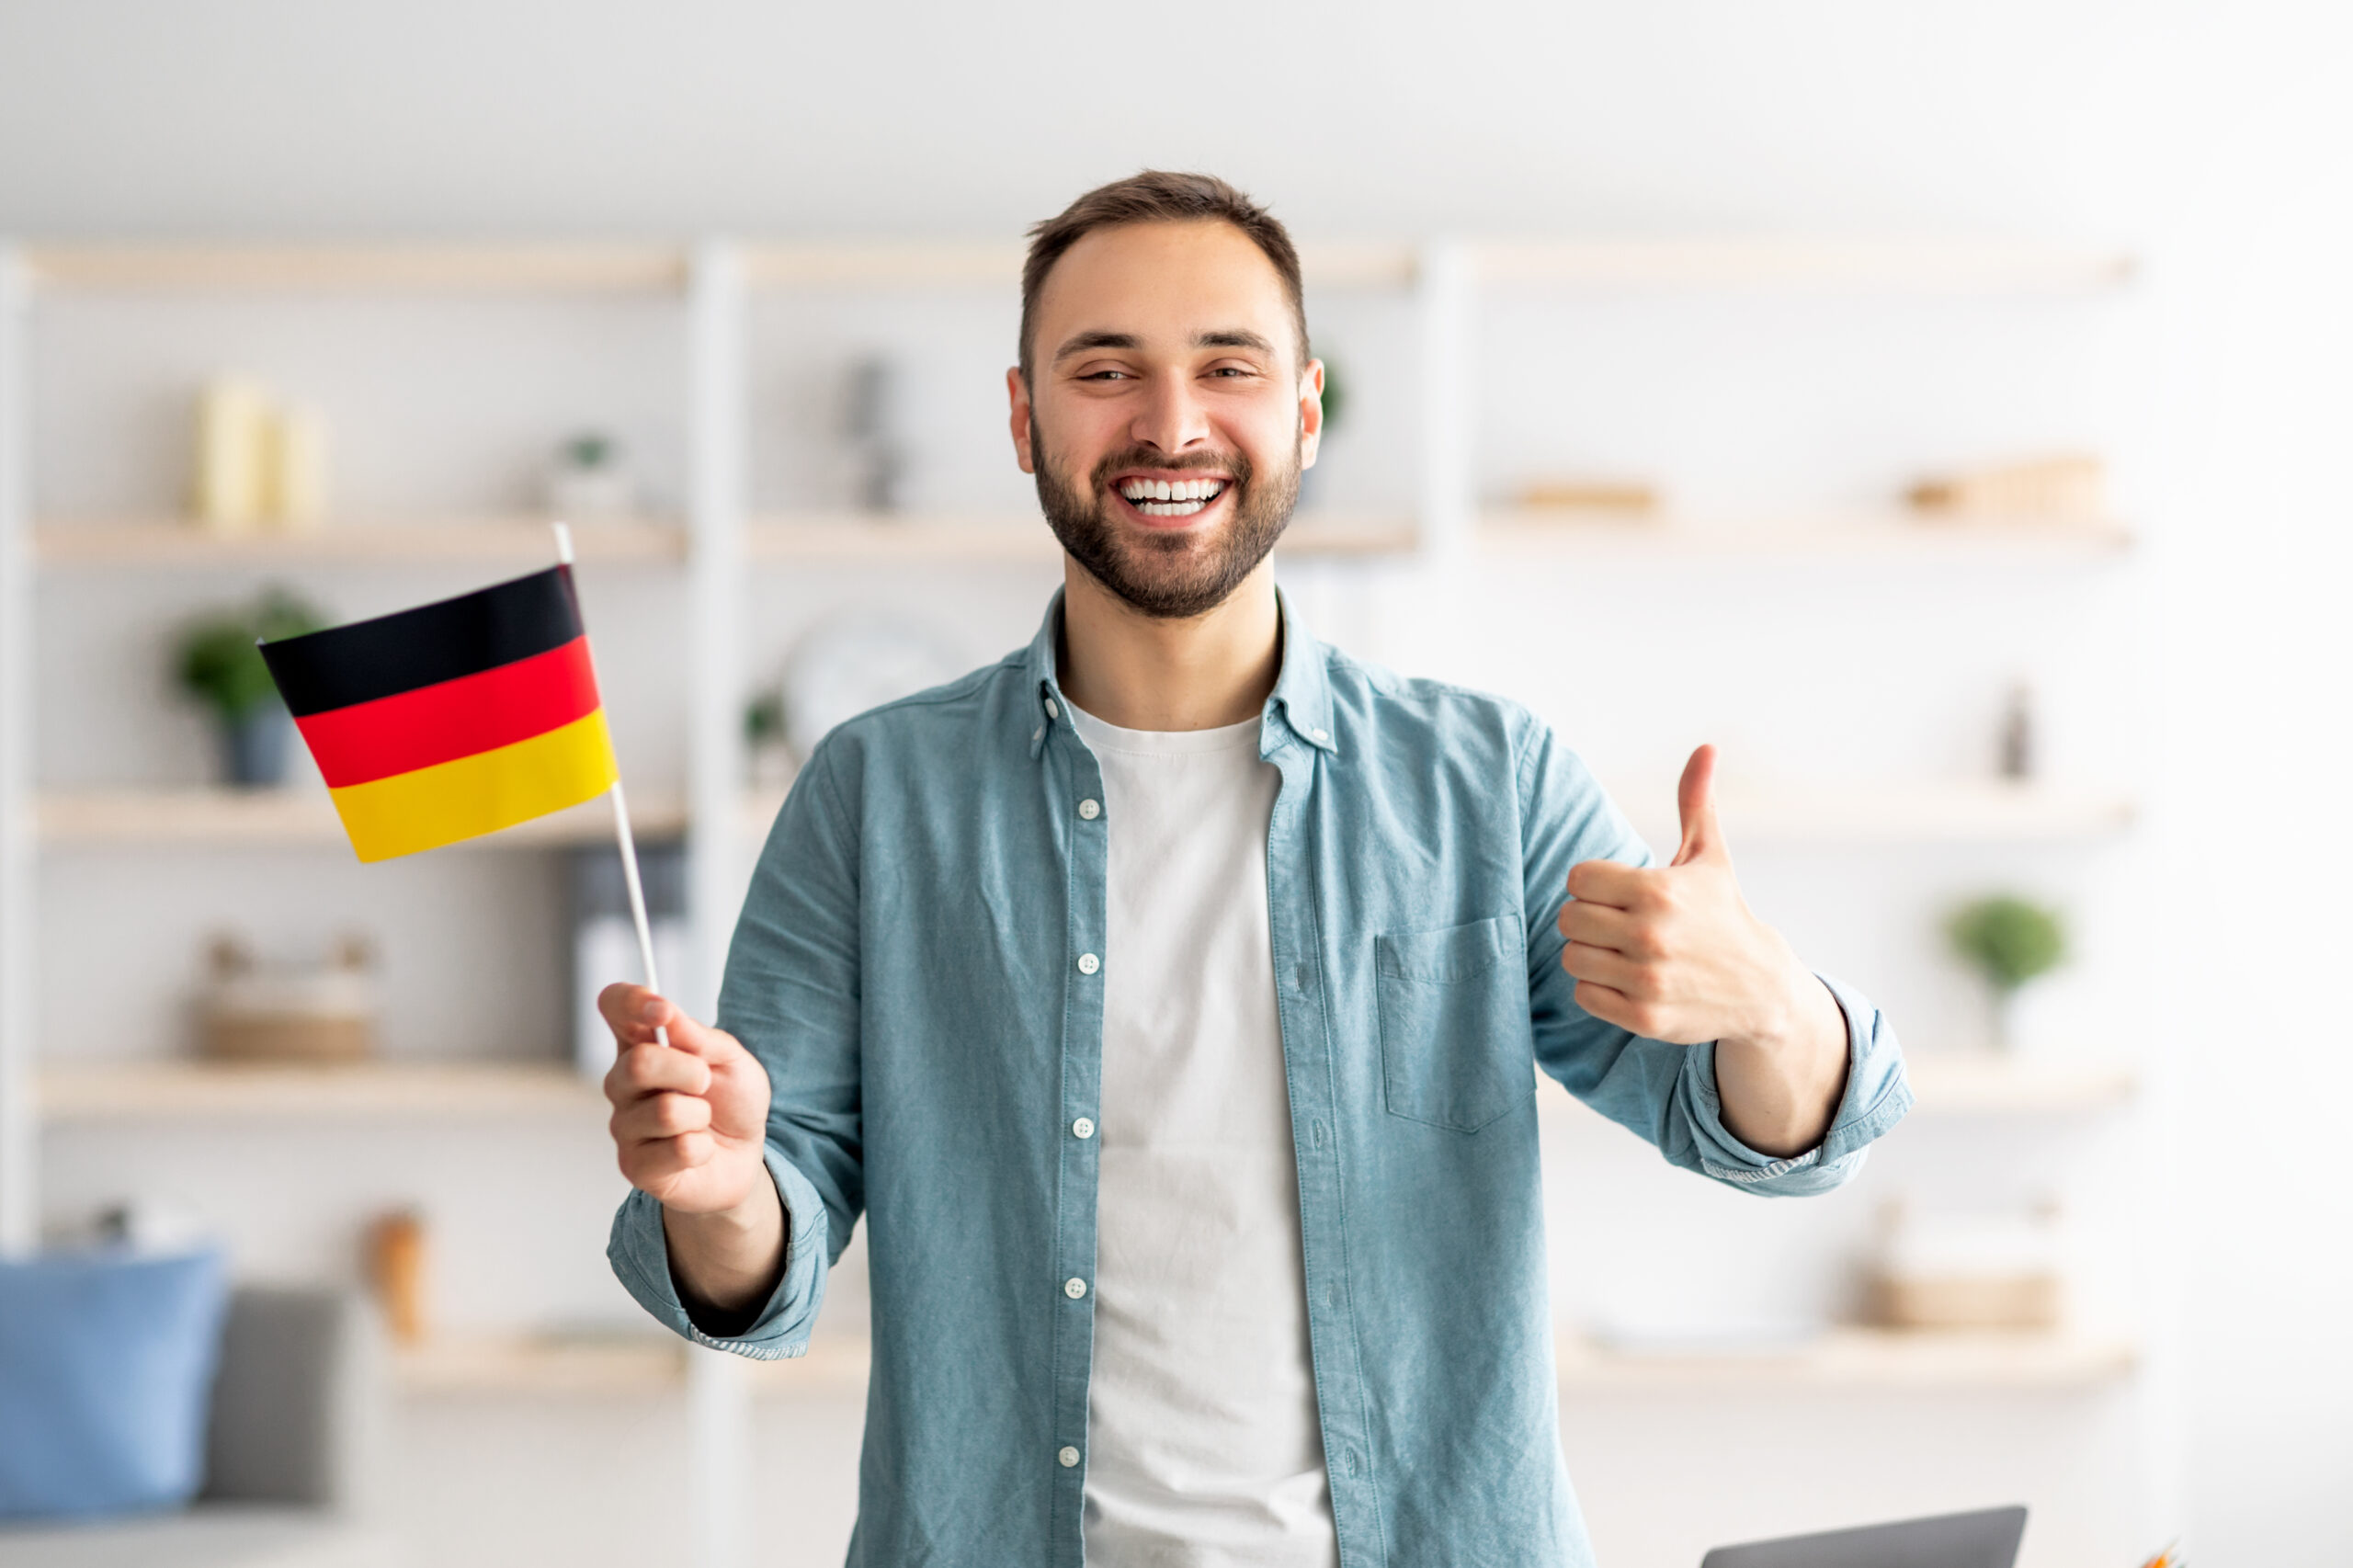 How many homosexuals live in Germany?